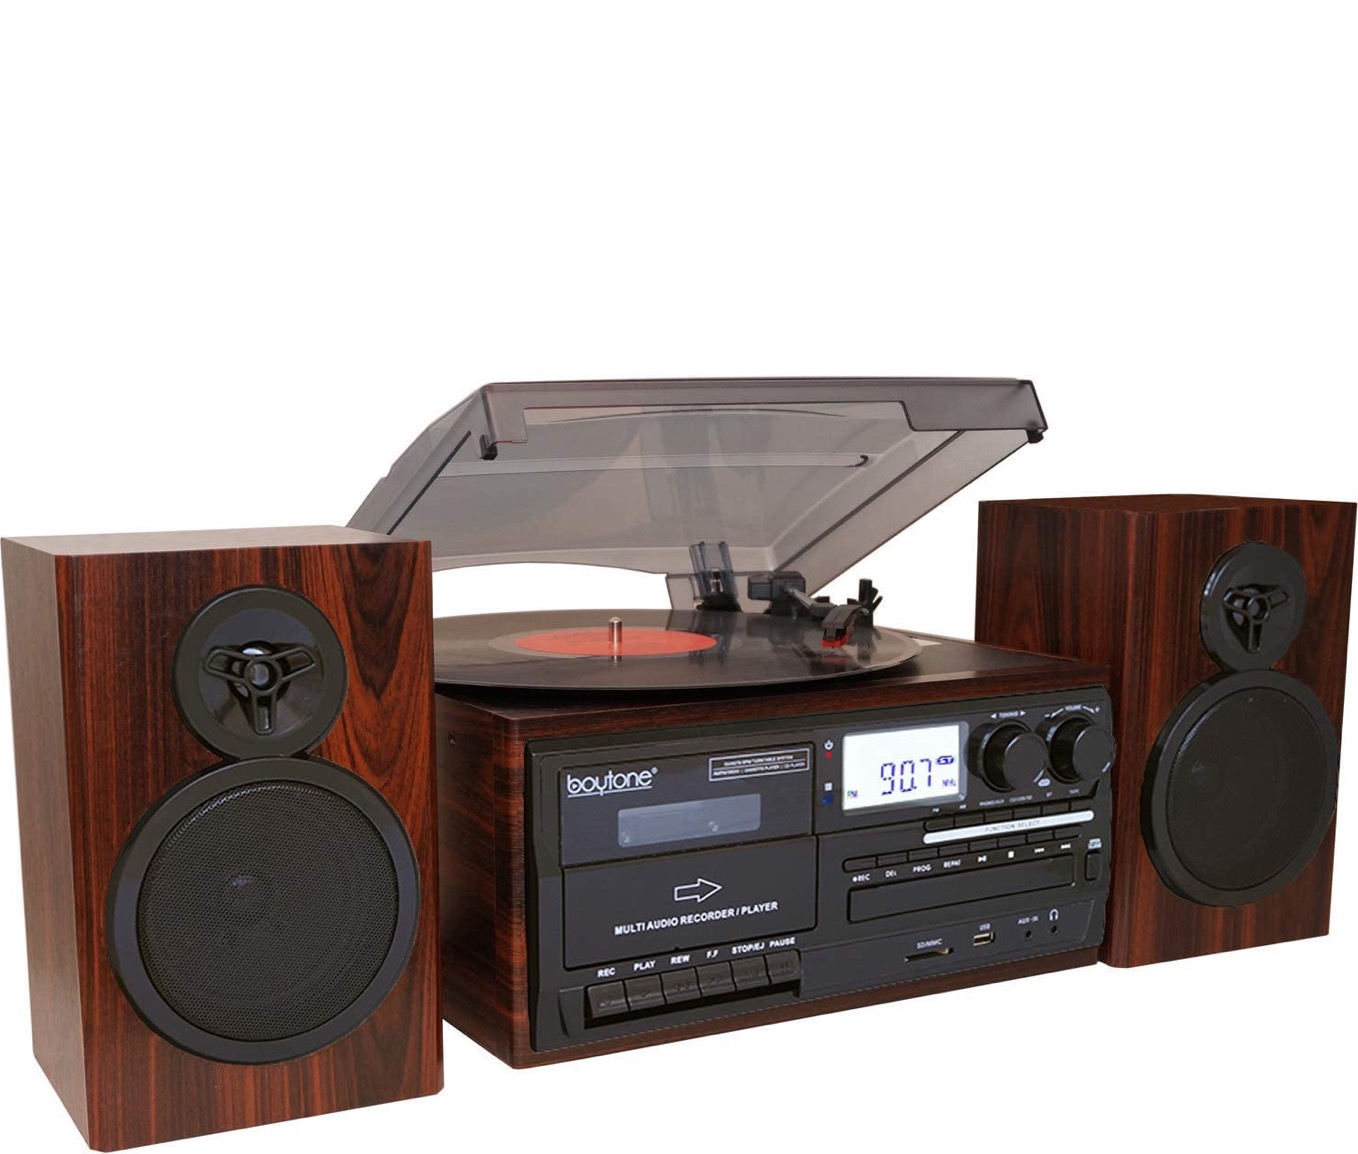 BT-28MB Classic Wireless Connection Turntable System - Mahogany-Black